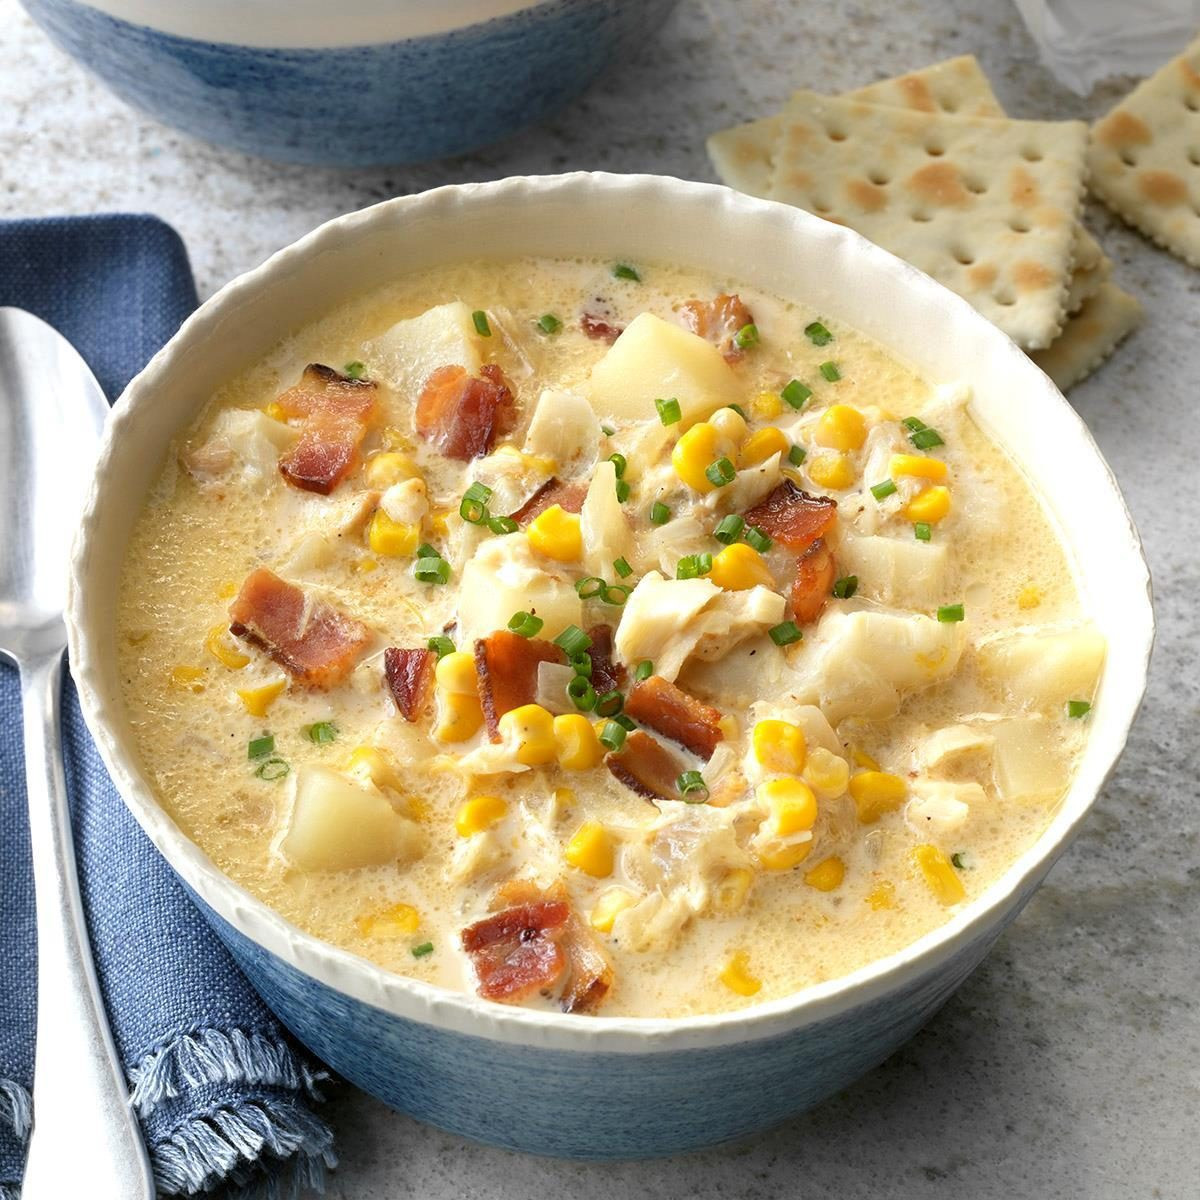 Recipe for Fish Chowder Awesome Country Fish Chowder Recipe How to Make It